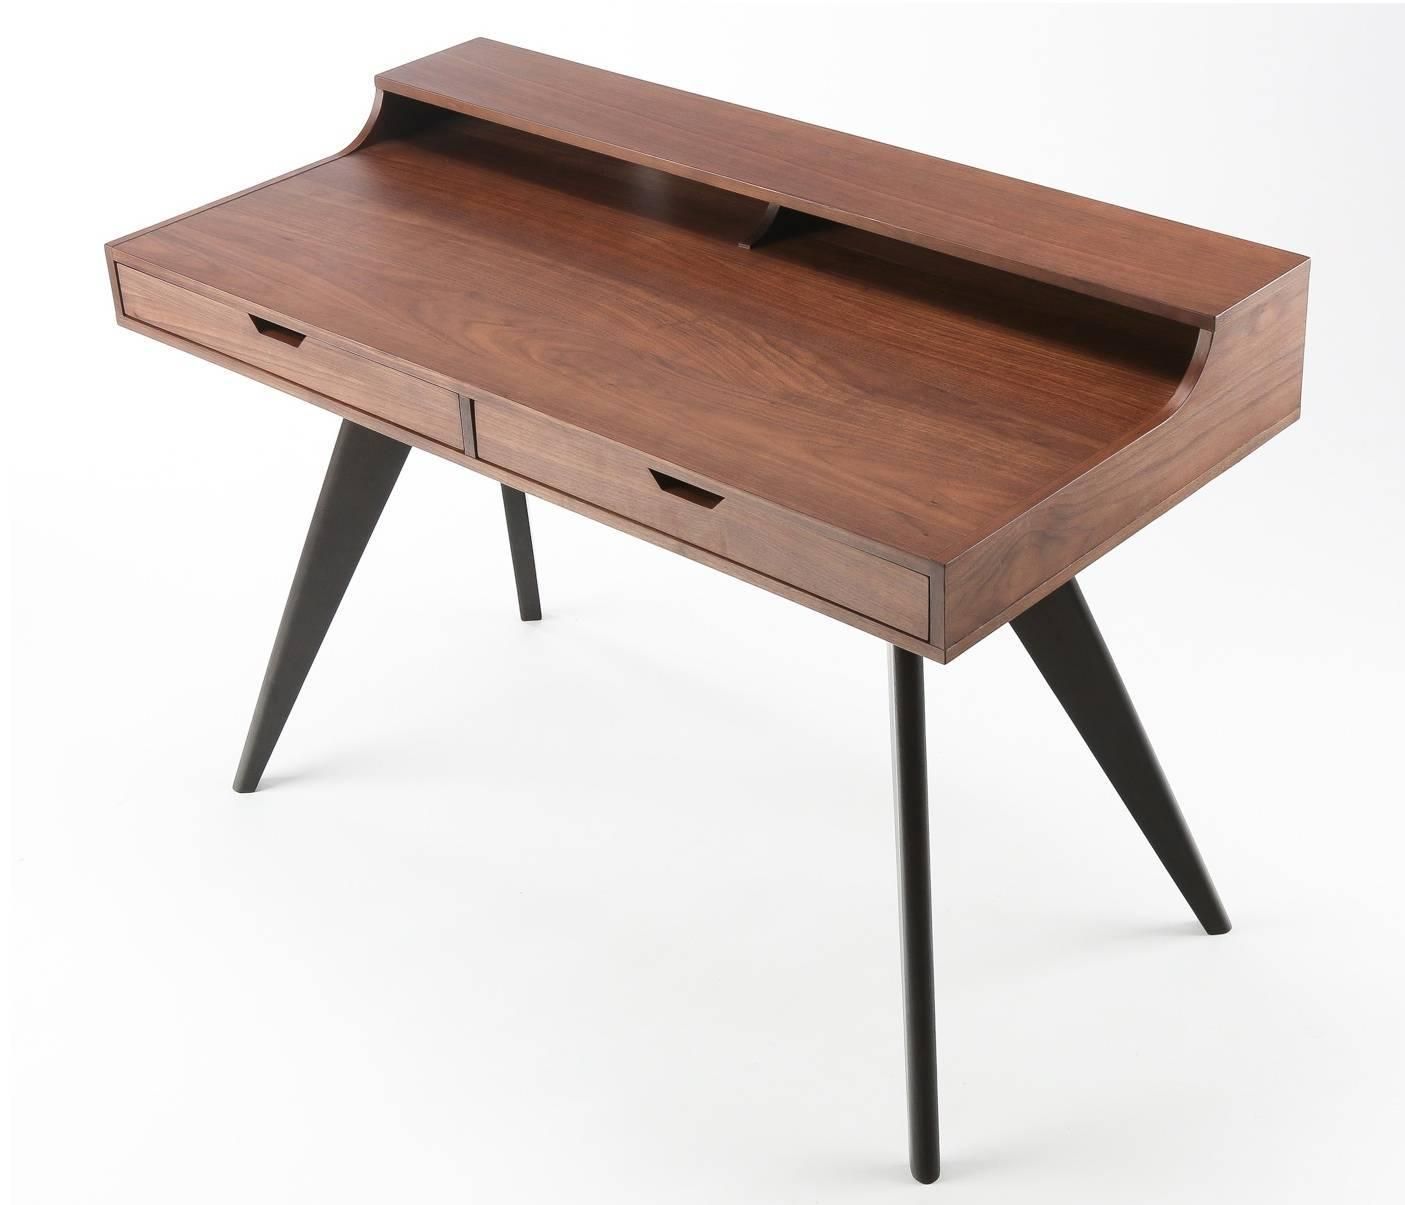 Contemporary Walnut And Wenge Veneer Writing Desk With Two Drawers At Regarding Glass And Walnut Modern Writing Desks (View 8 of 15)